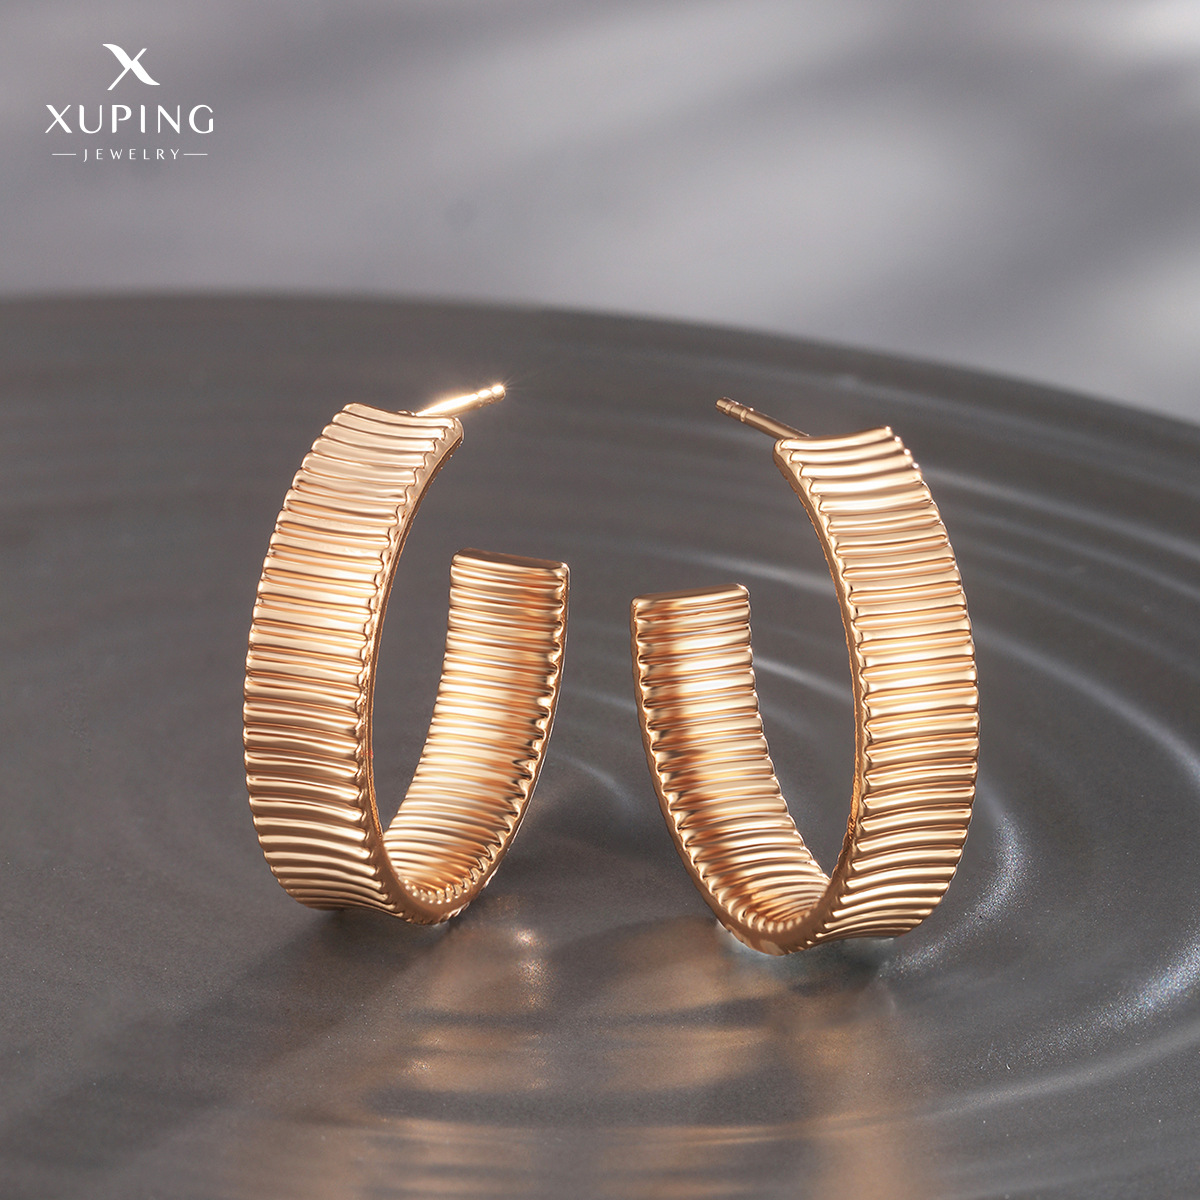 Xuping Jewelry Simple Striped C- Type Earrings Earrings European and American Fashion Cool Exaggerated Frosty Style Earrings Ornament Female